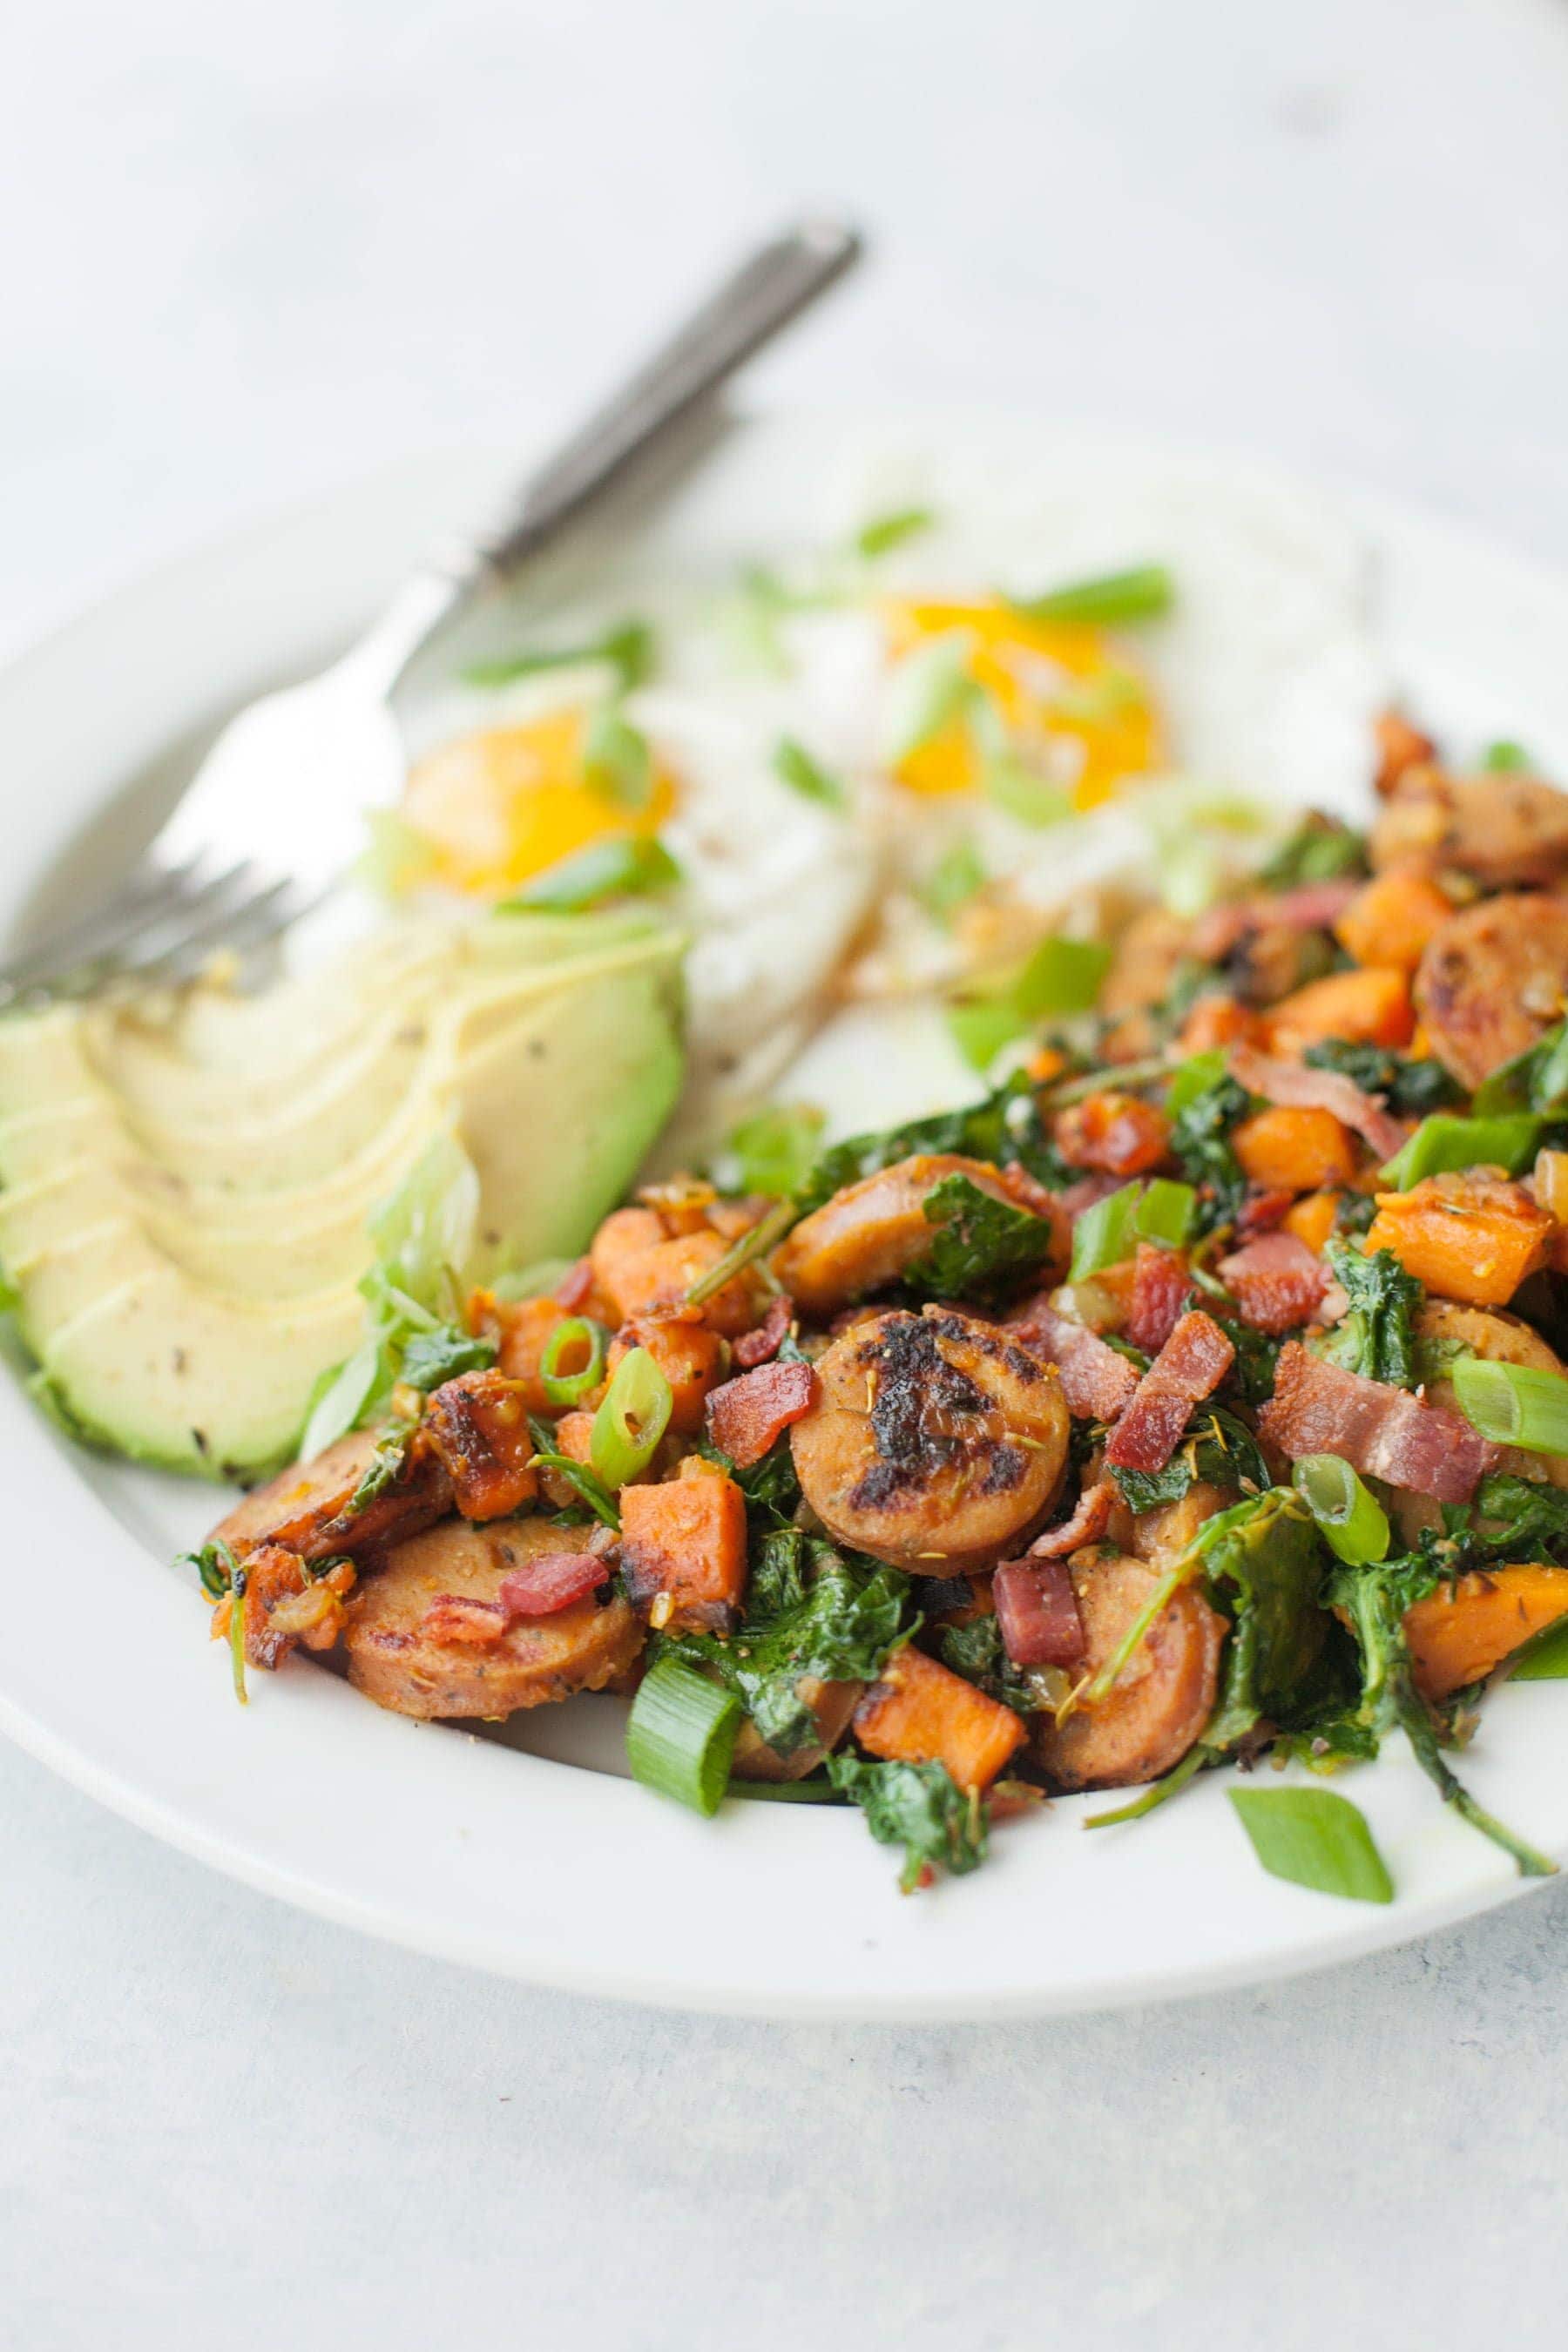 Tight view of white plate with sweet potato hash, eggs, and avocado